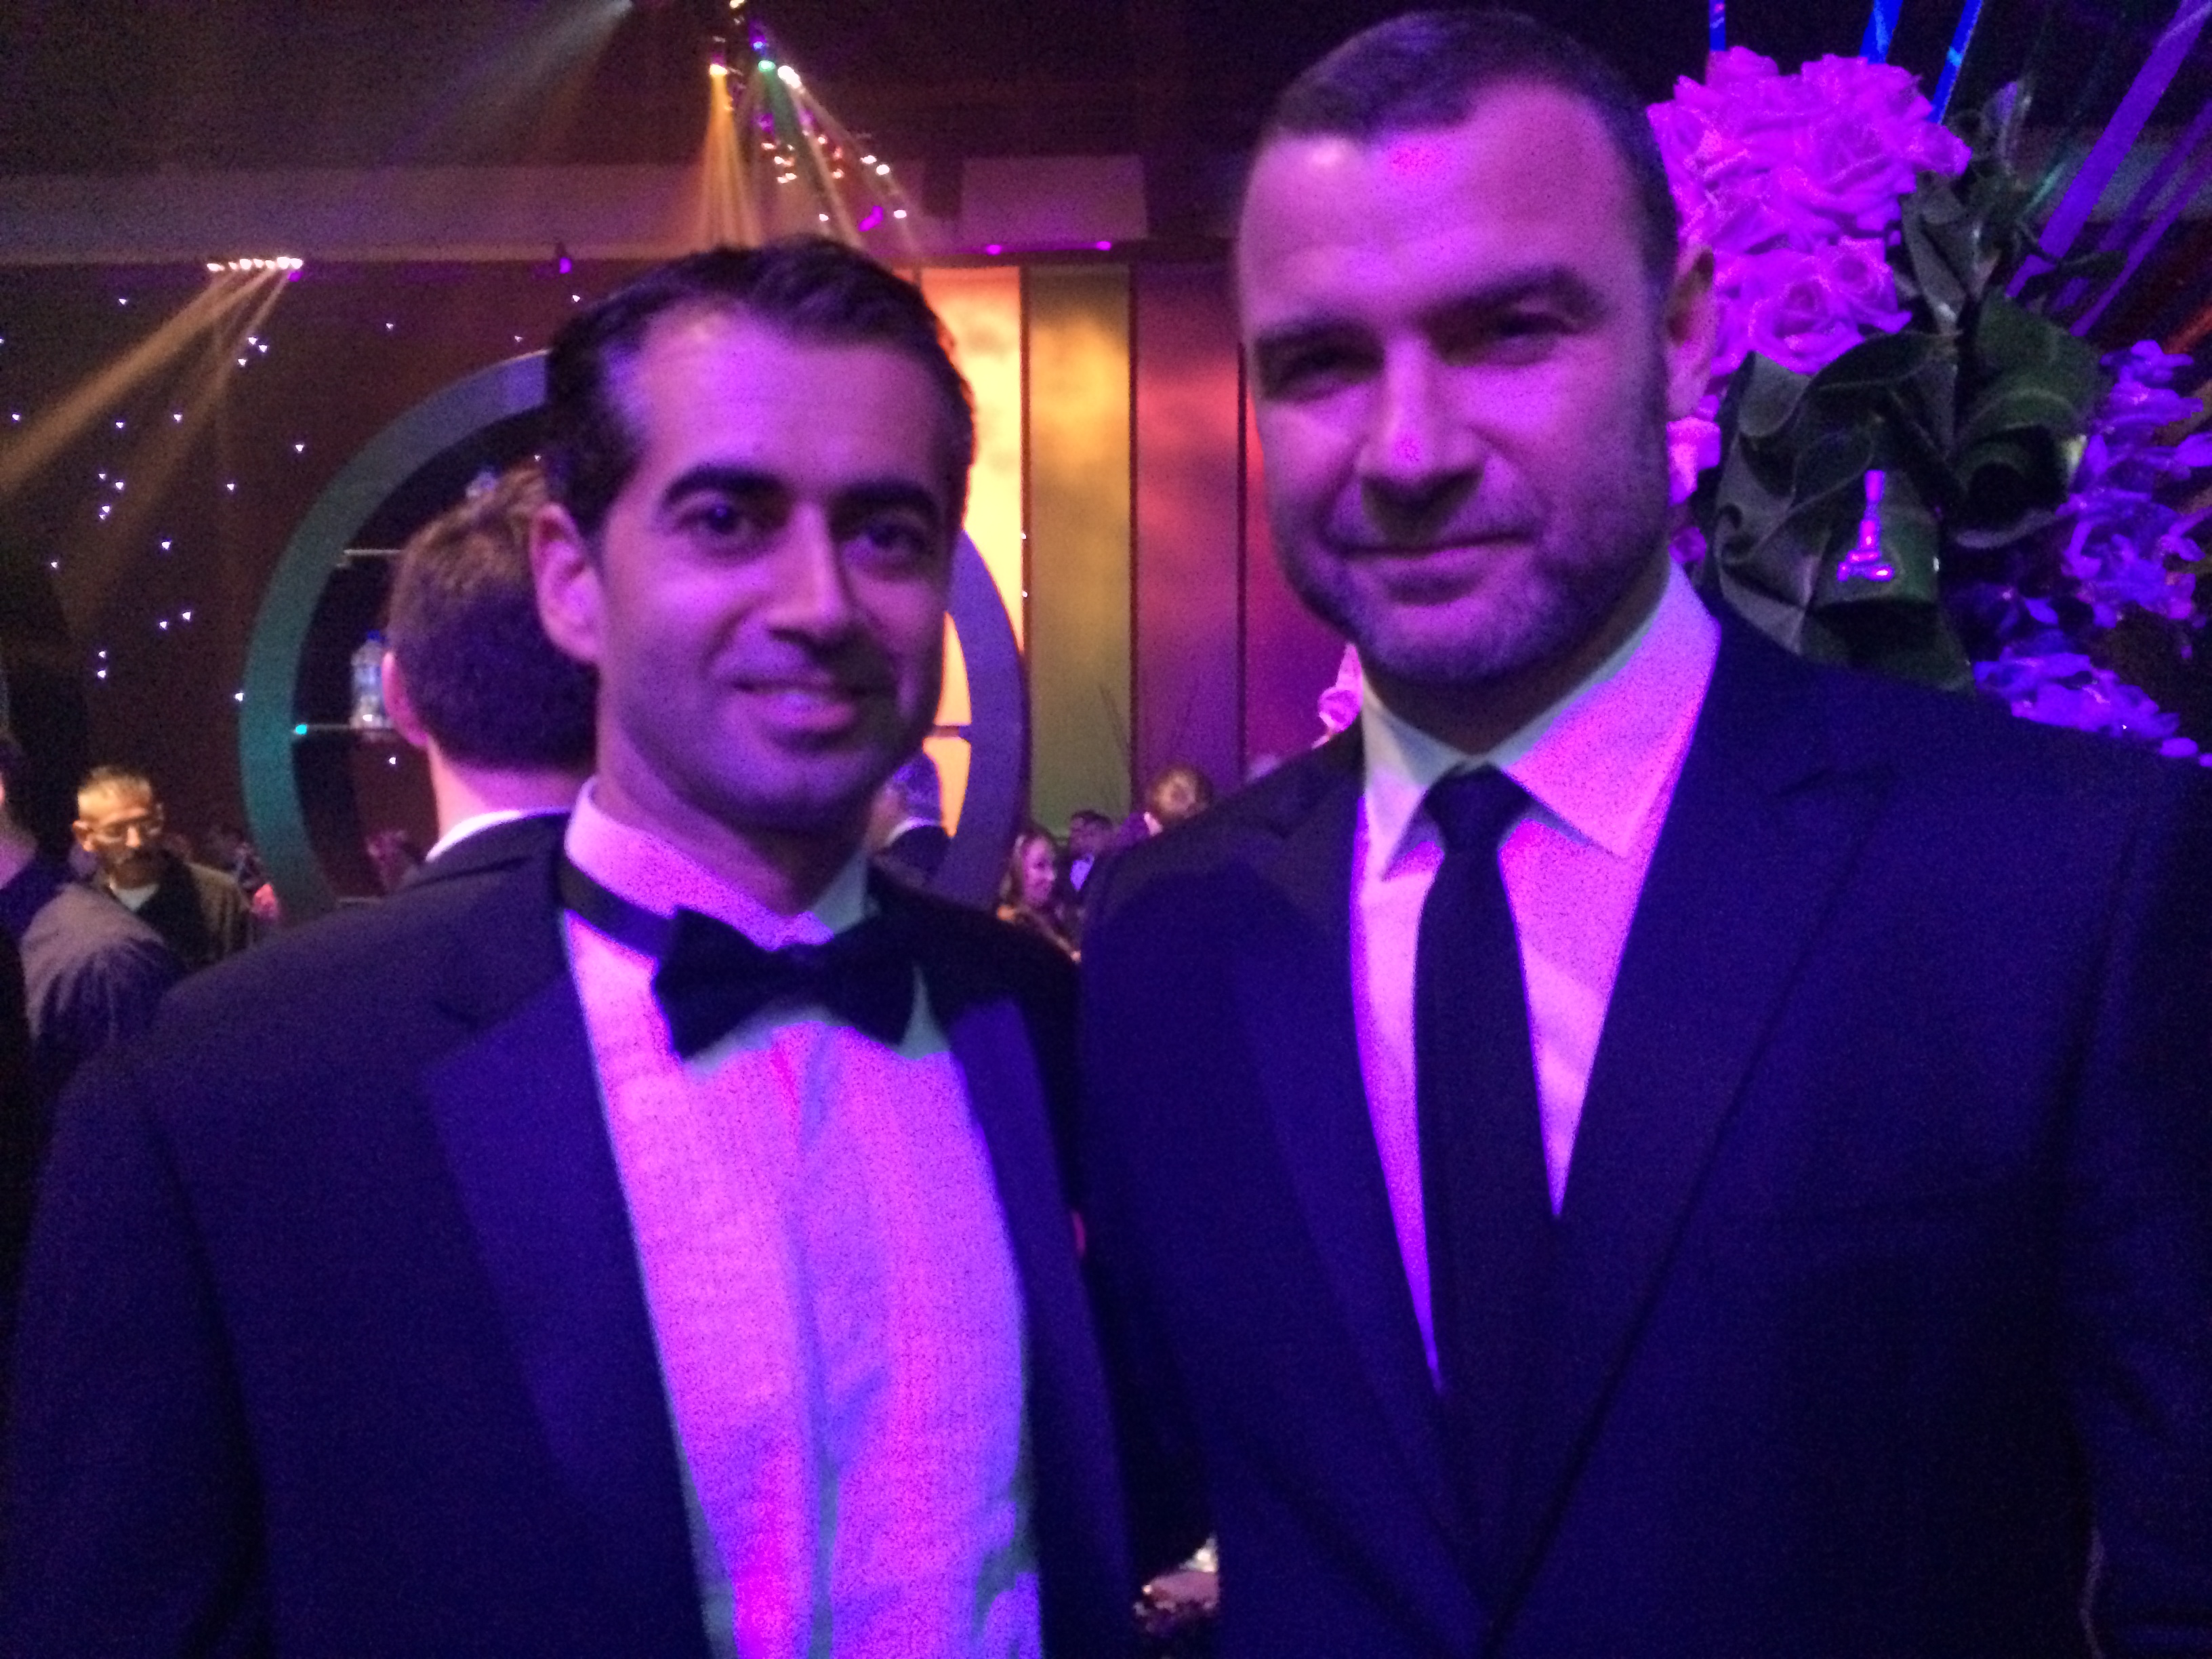 Governors Ball after party at the Emmys 2014 with my 